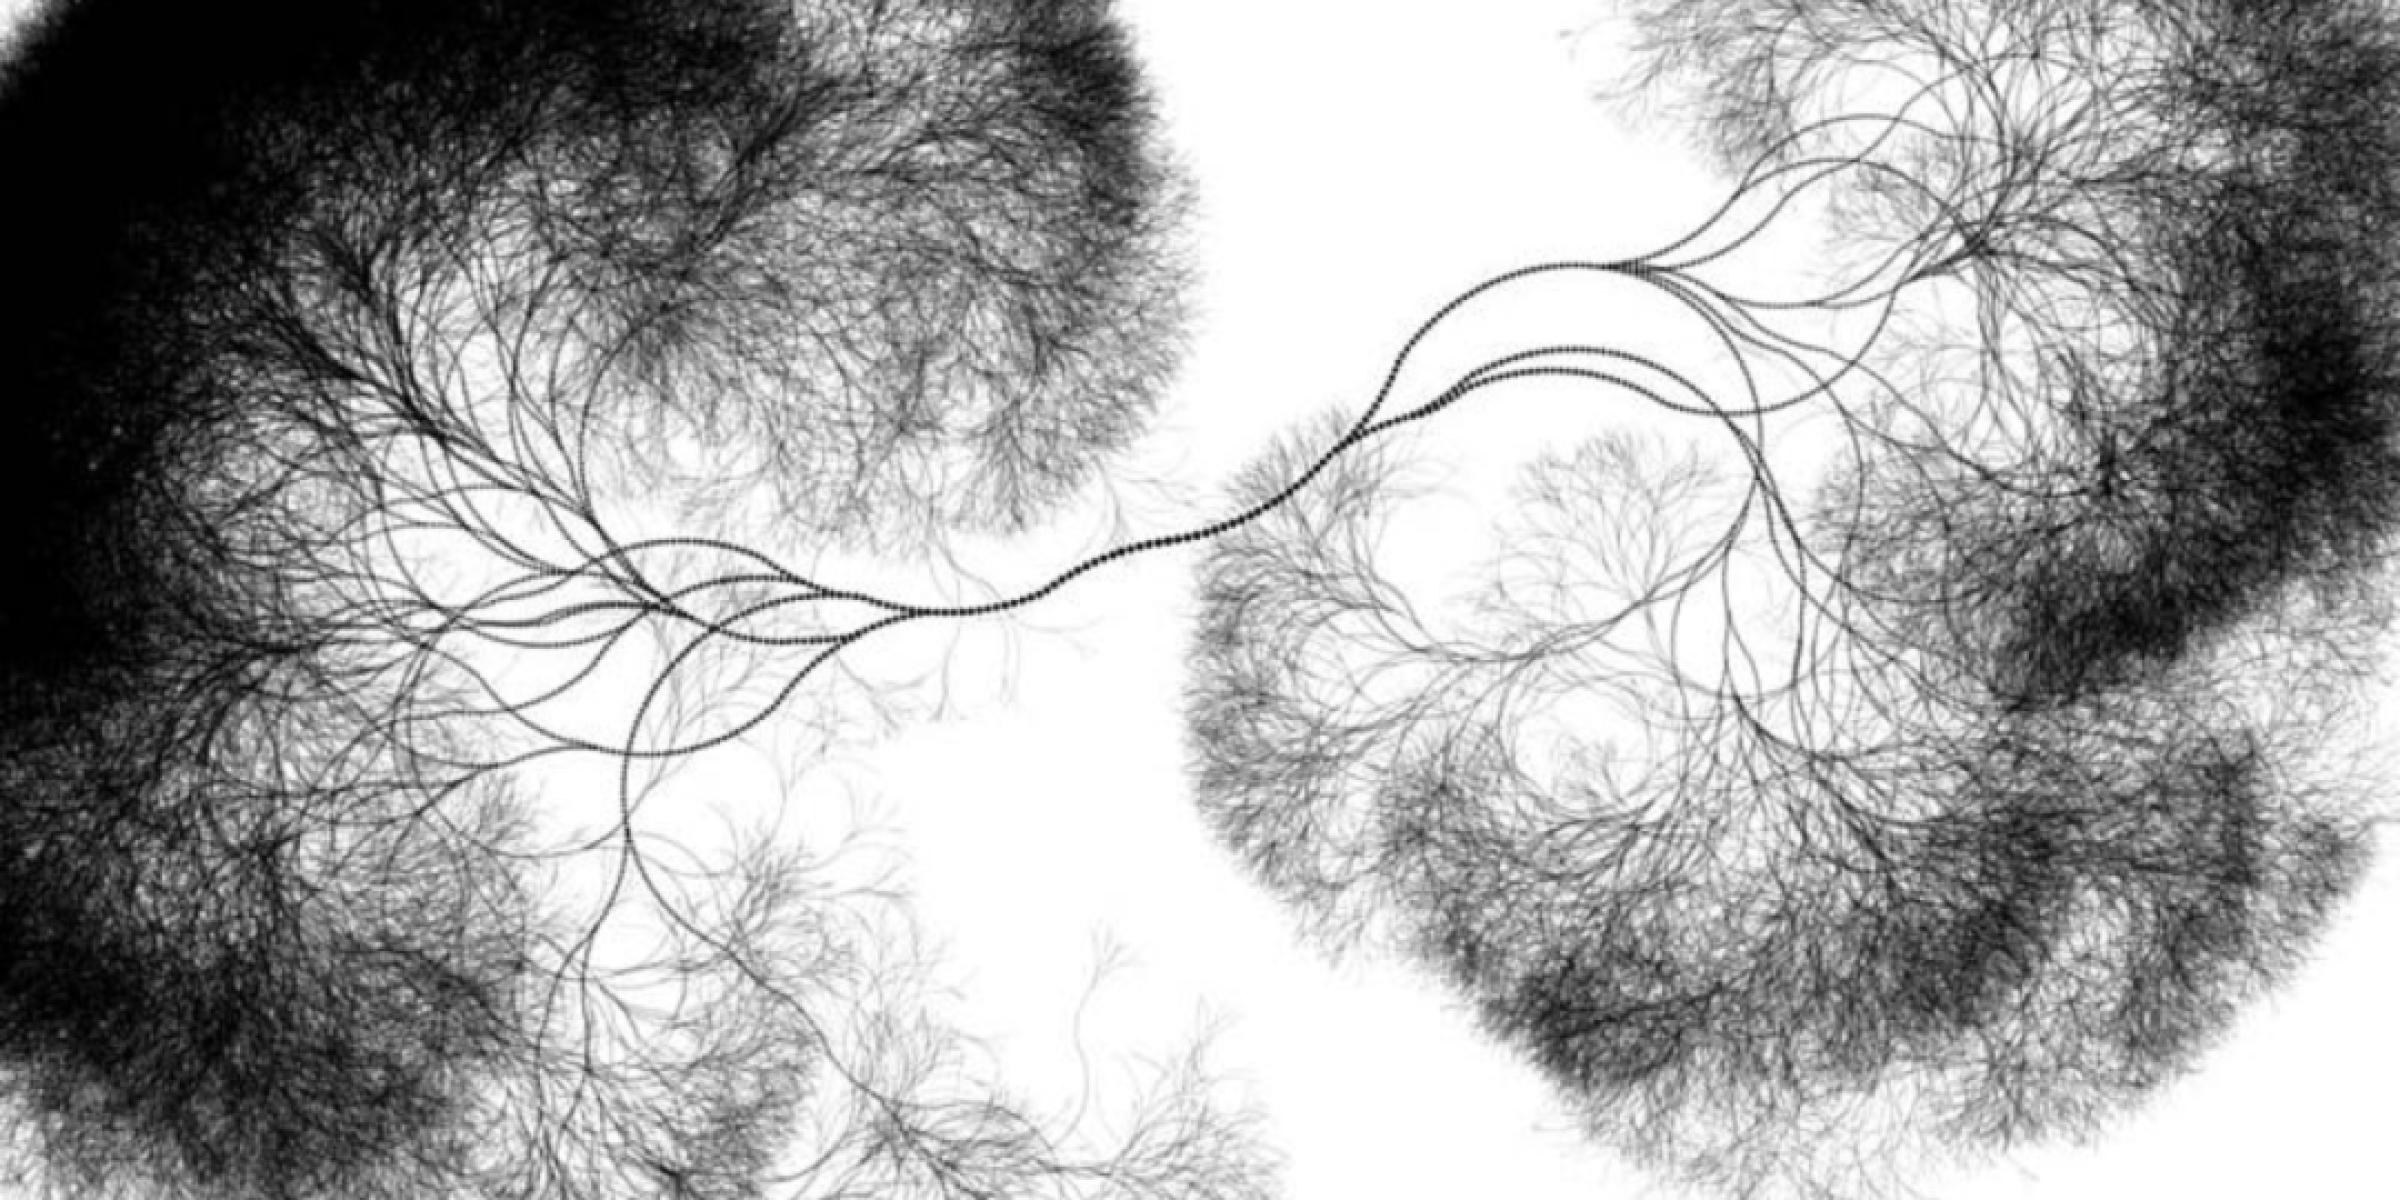 A black and white image titled neuron fractal 1 by Anthony Mattox shows a complex tree-like display of neurons